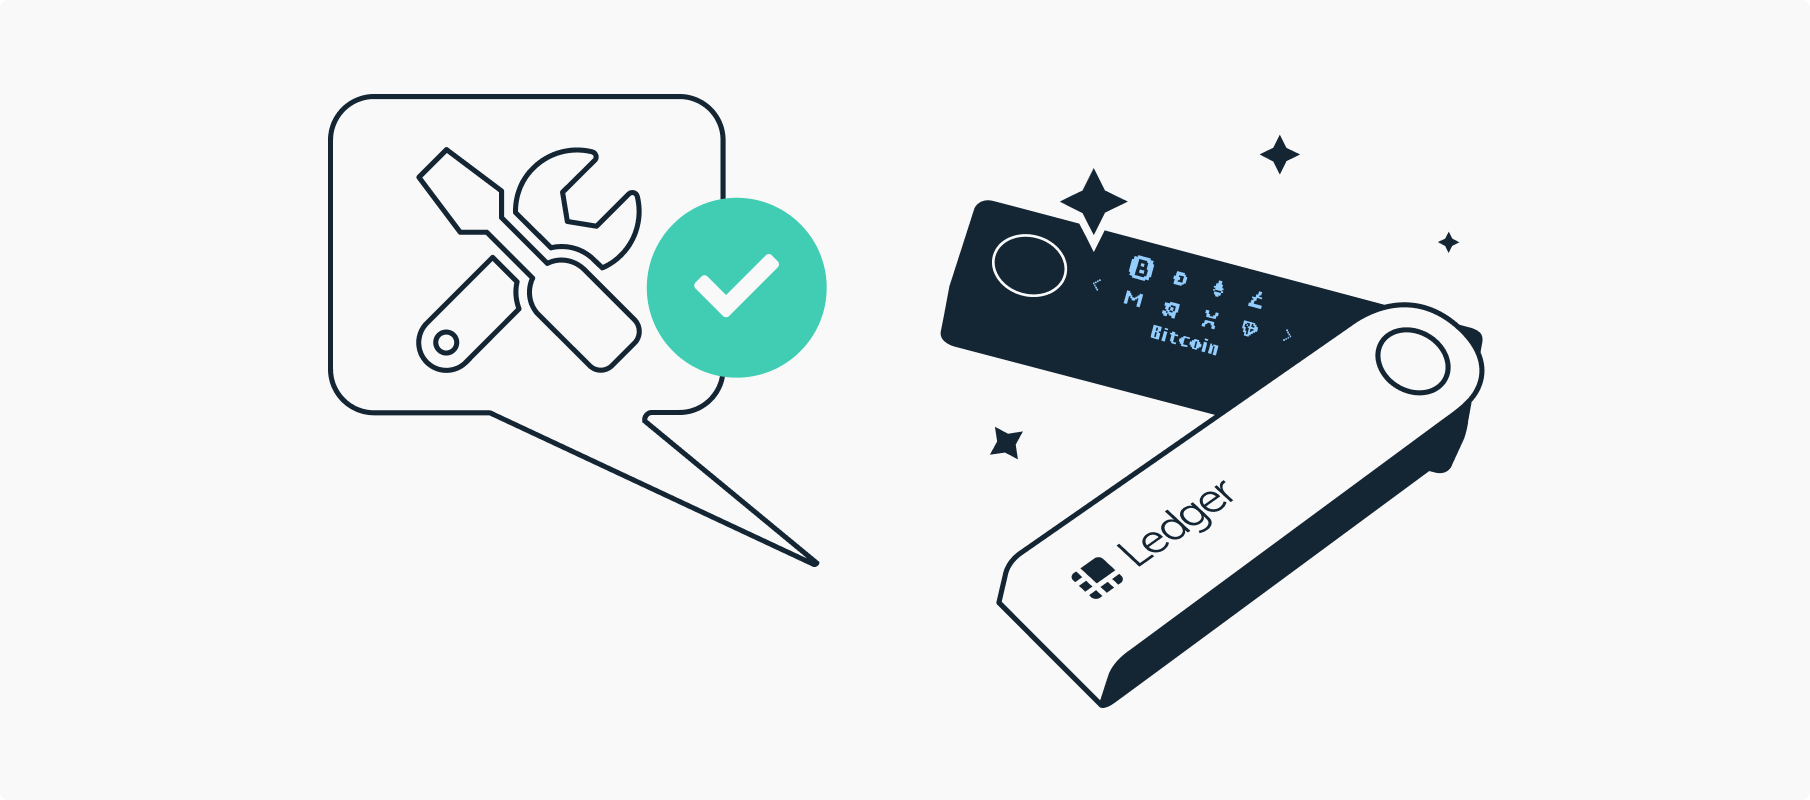 The Ledger Nano S Lifecycle: From A to Z